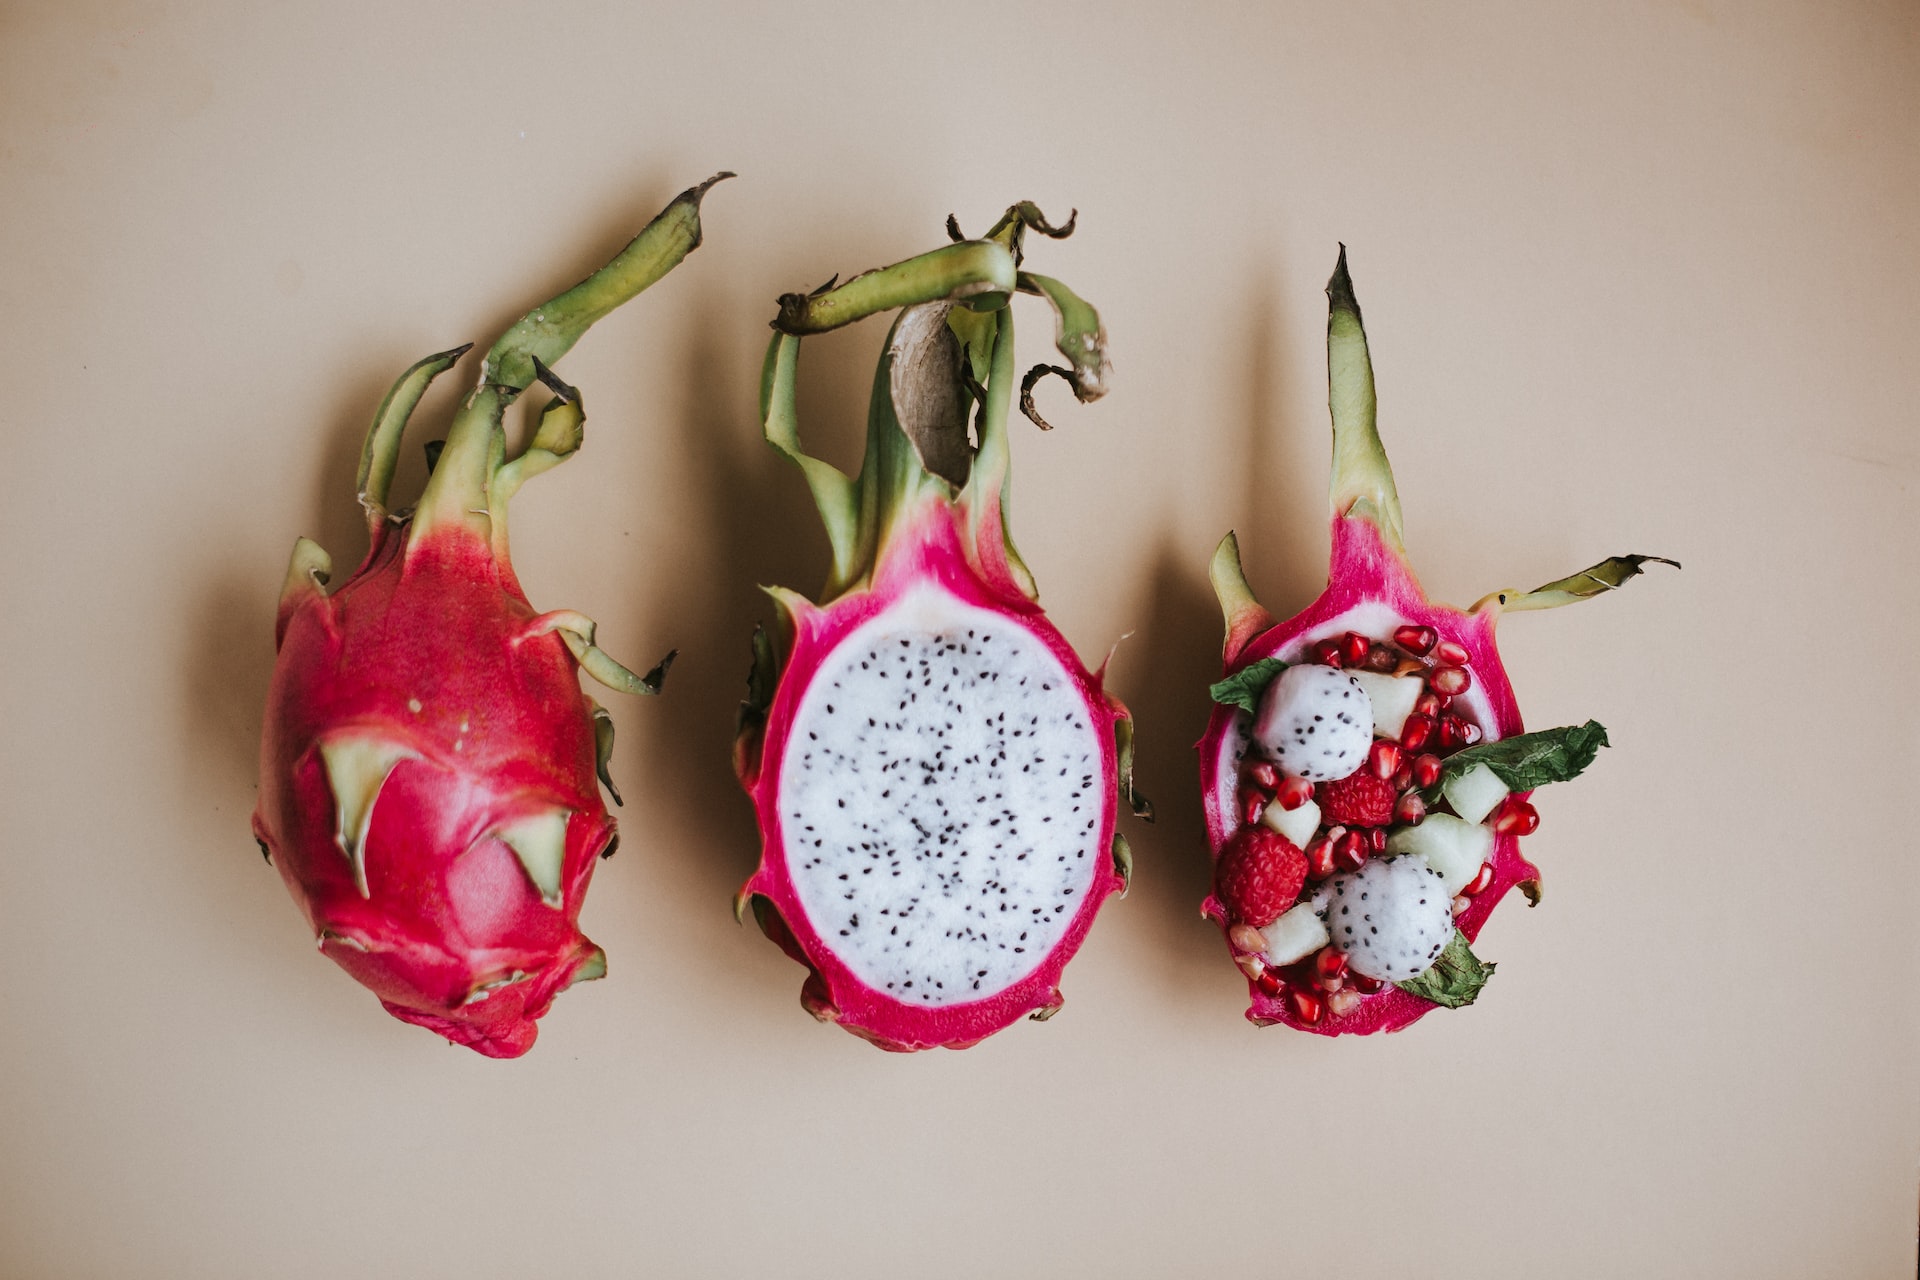 Dragon Fruit: A Tropical Superfood with Potential Health Benefits